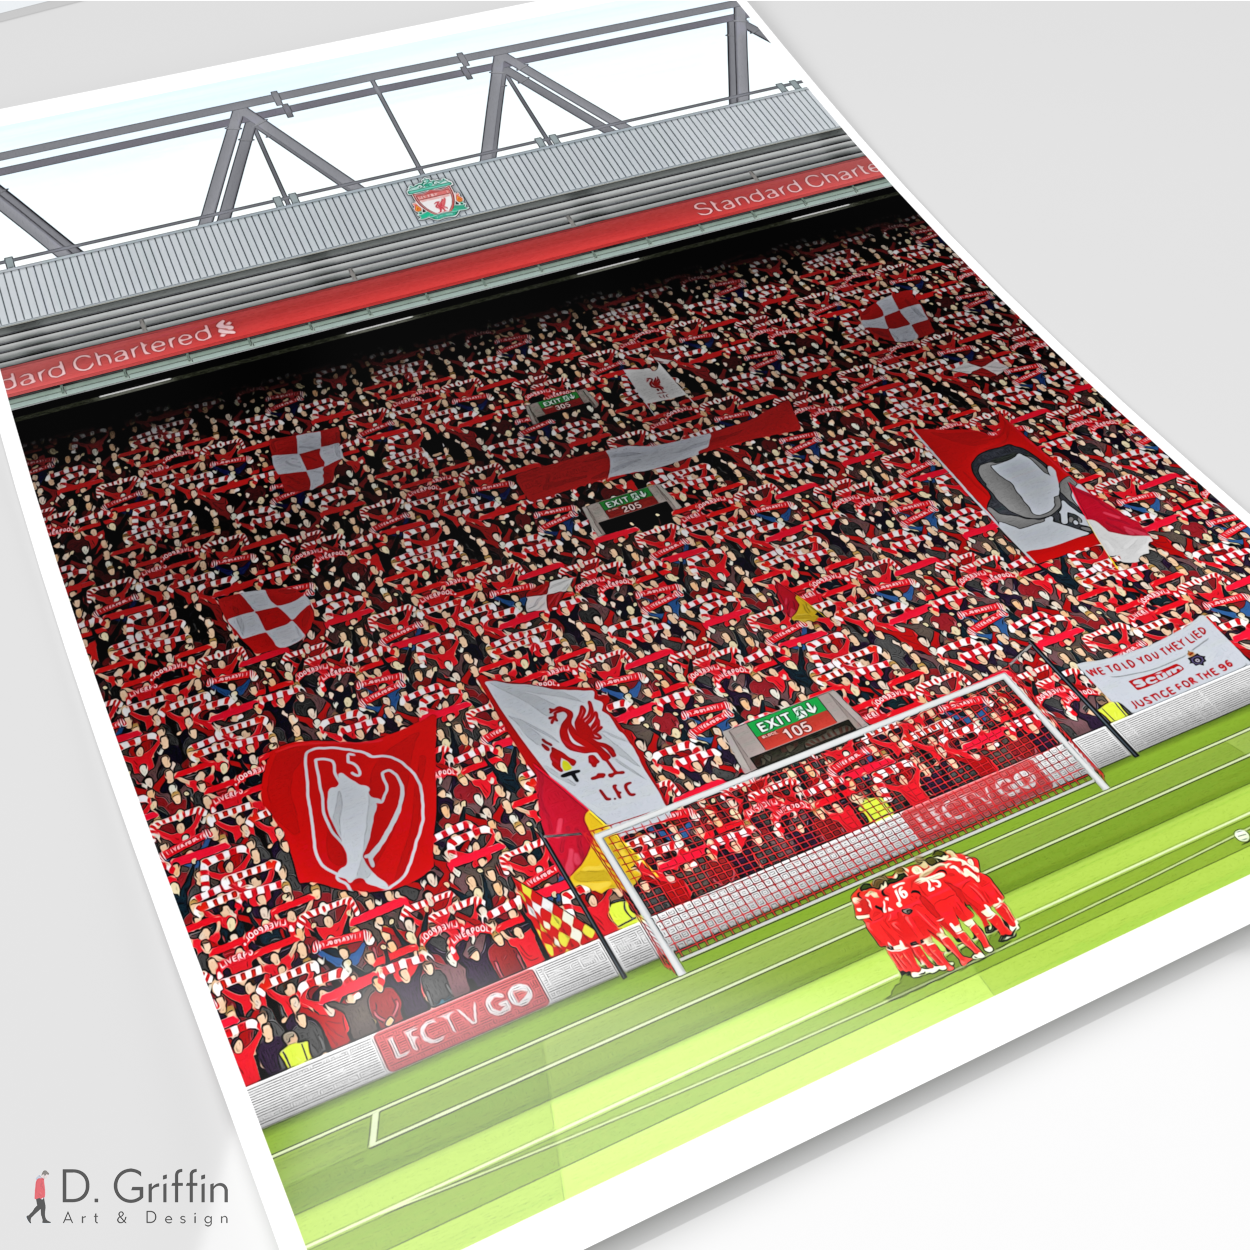 This is Anfield Art Print